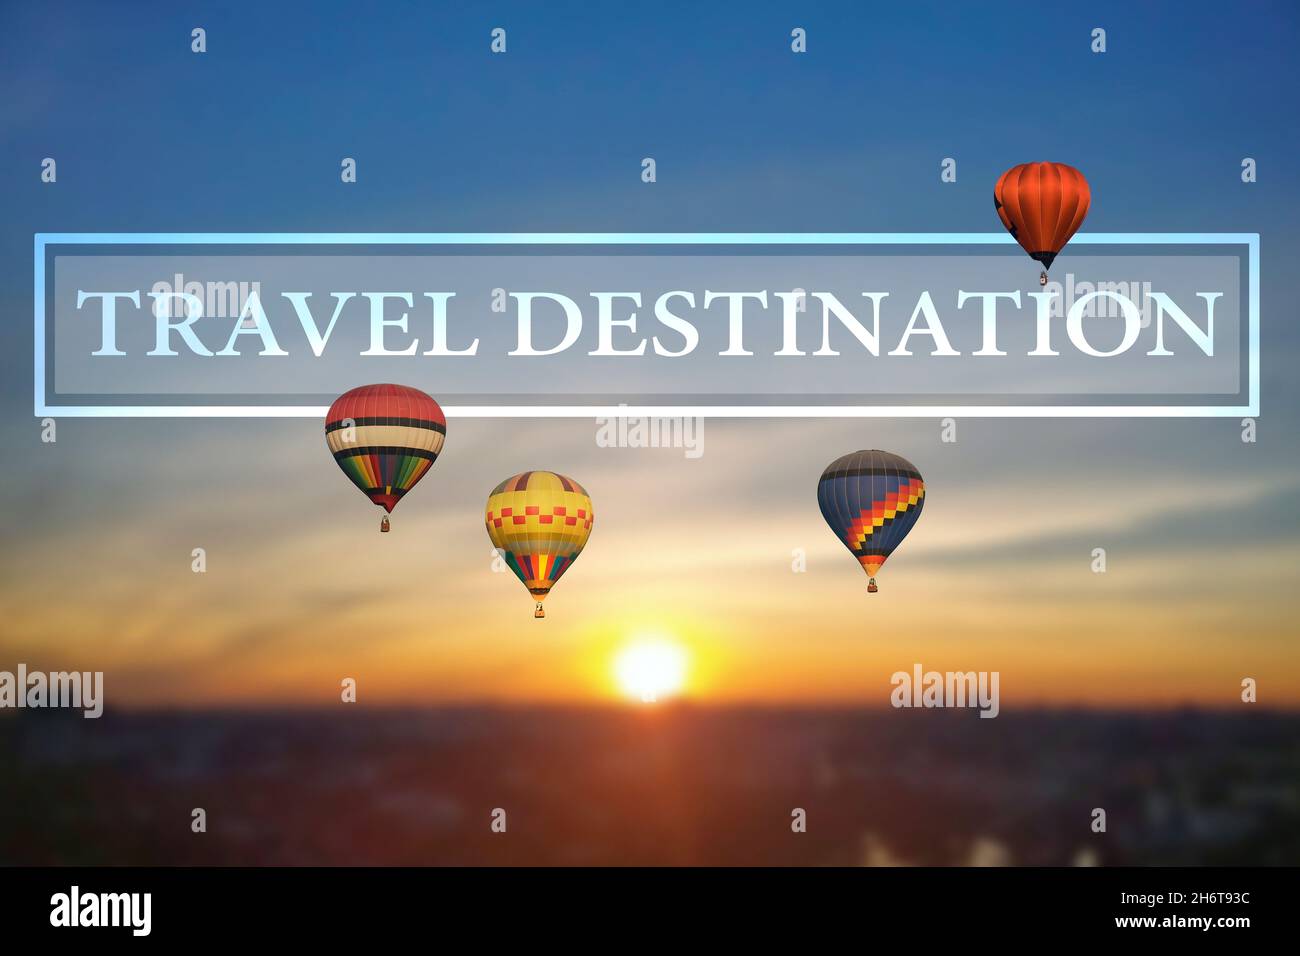 Travel destination background with hot air balloon and the morning sunrise. Stock Photo